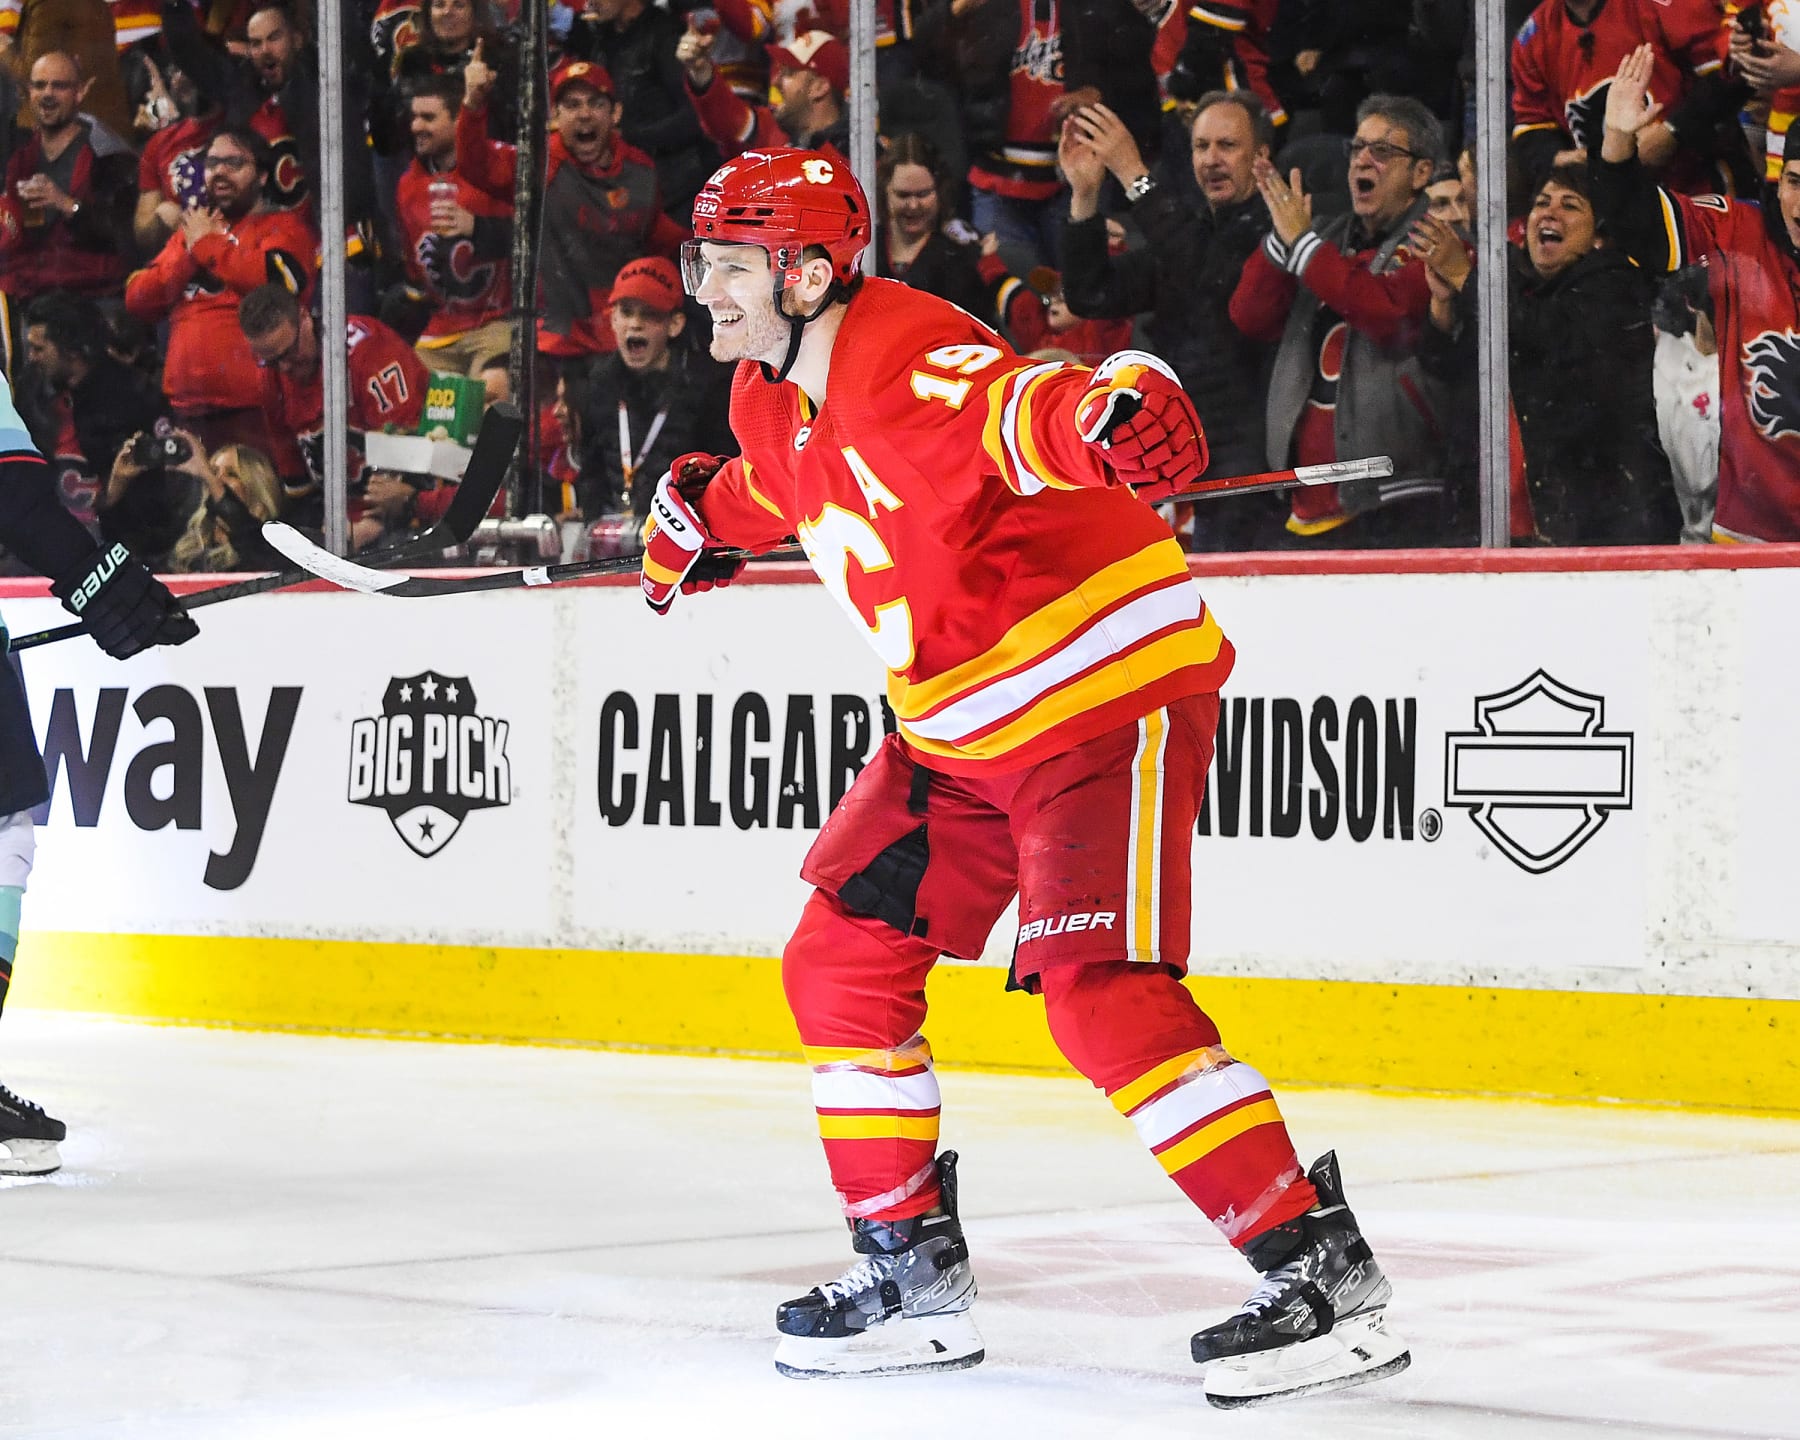 NHL: Matthew Tkachuk wanted long-term deal withs Flames in 2019